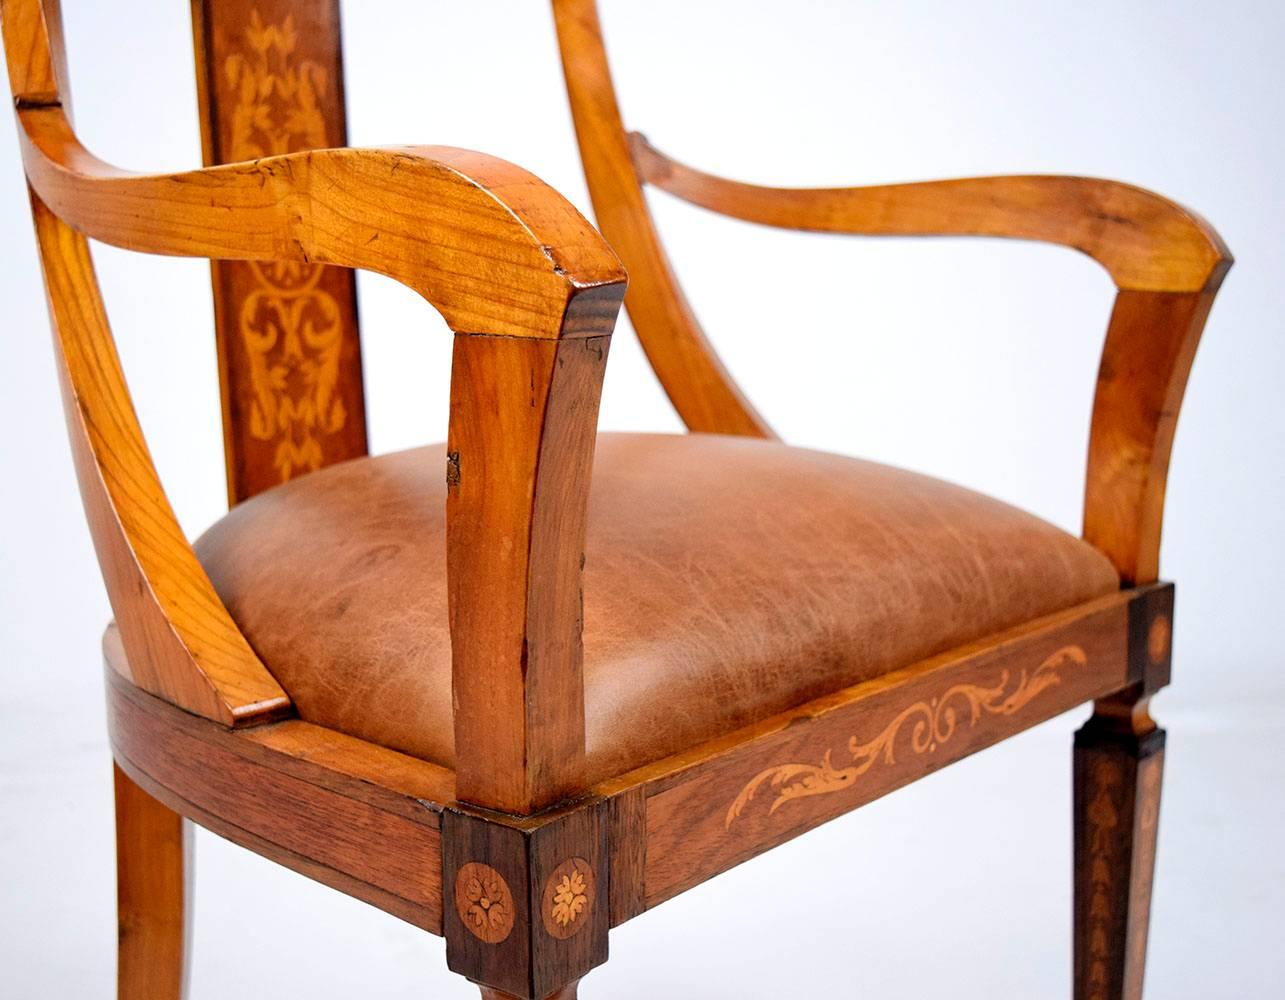 Carved Antique English Marquetry Regency-Style Armchair